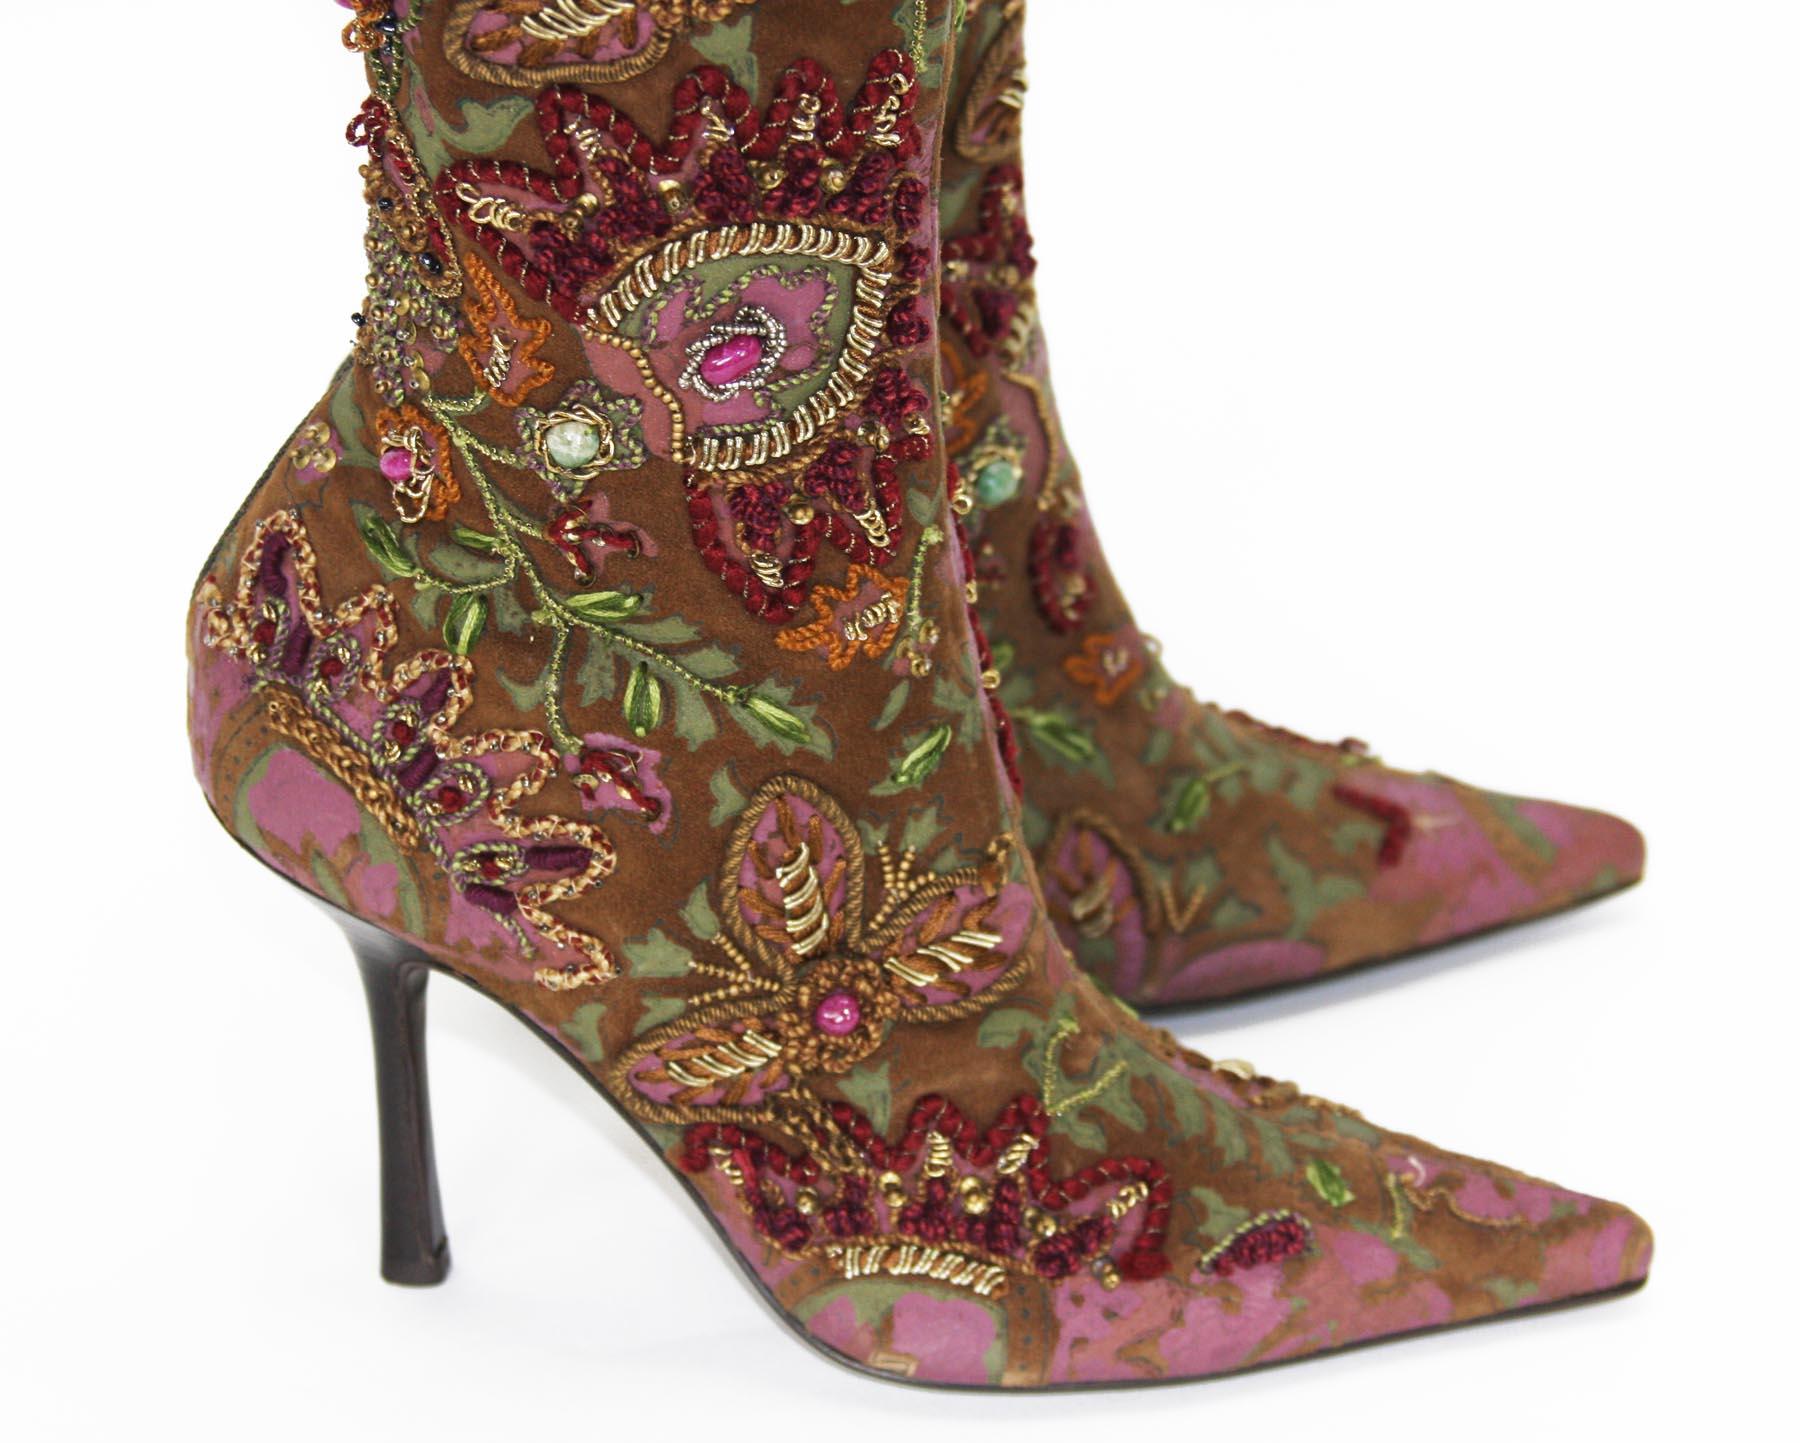 New Oscar De La Renta F/W 2004 Hand Painted Embroidered Boots 36.6 - US 6.5 For Sale 2